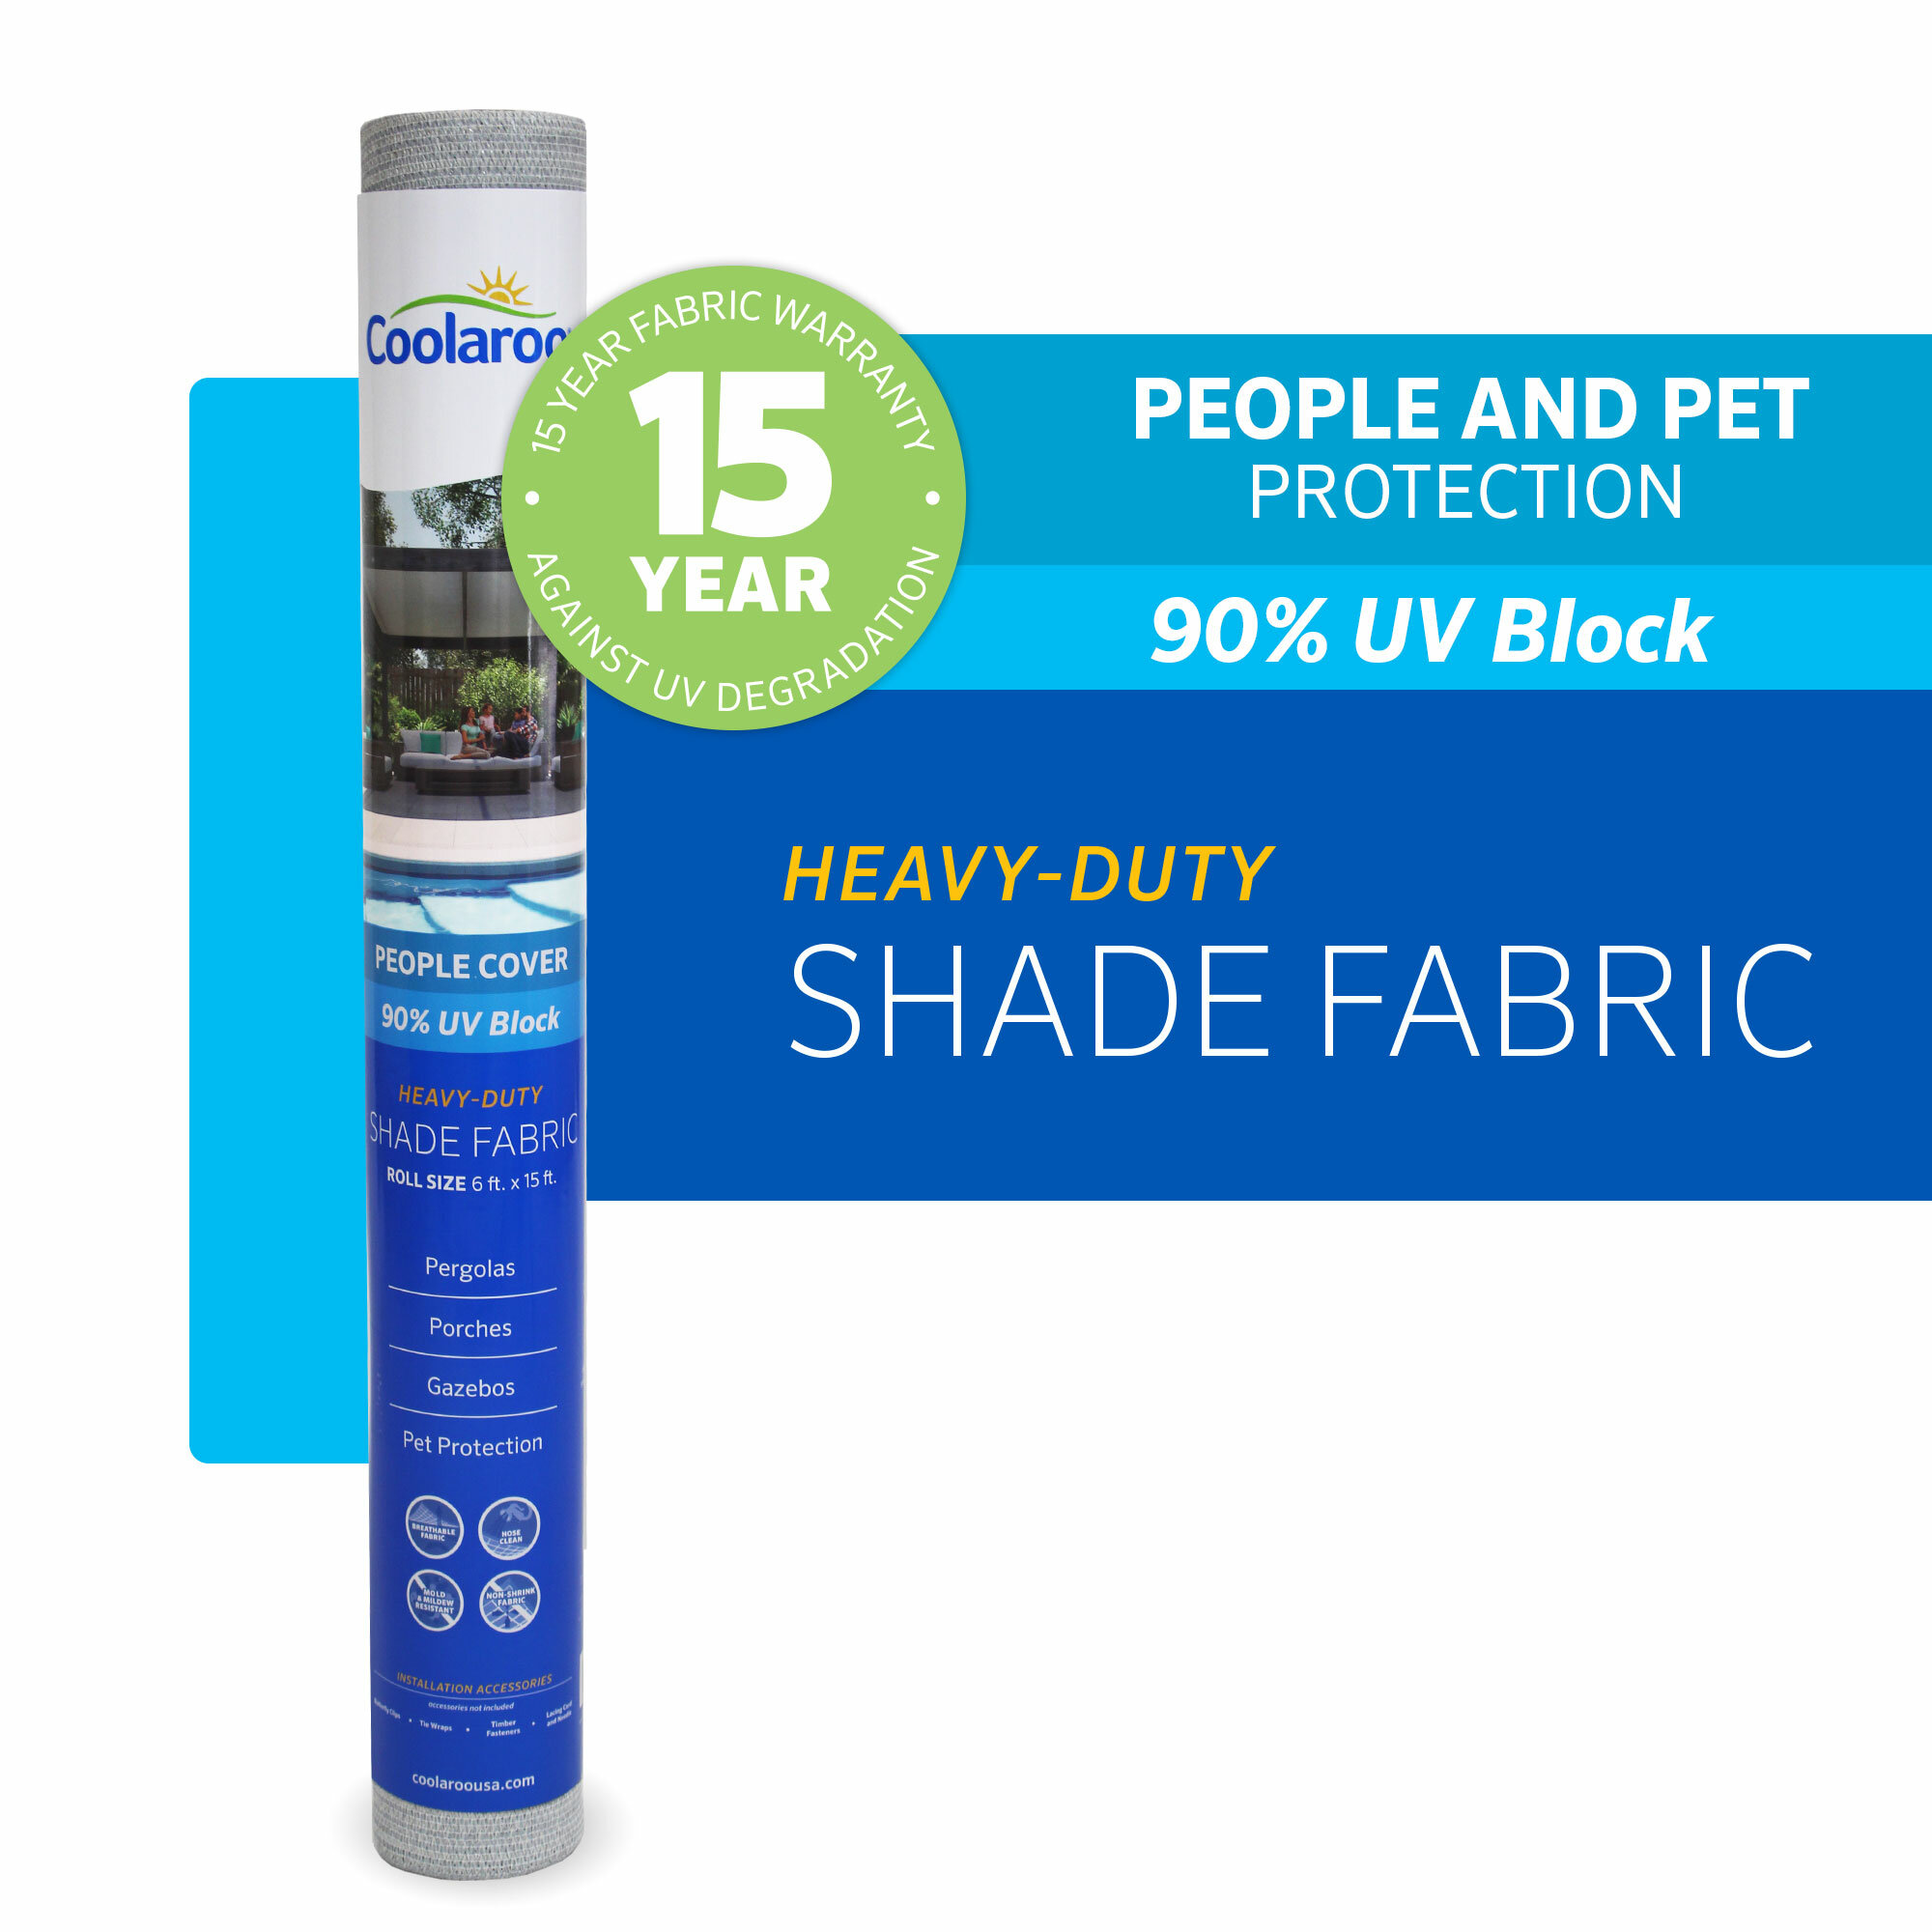 Grey COOLAROO Shade Fabric 90% UV Protection for People 6 X 15 USA 339586 Outdoor or Exterior Cover, Gale Pacific PET OR Home LG